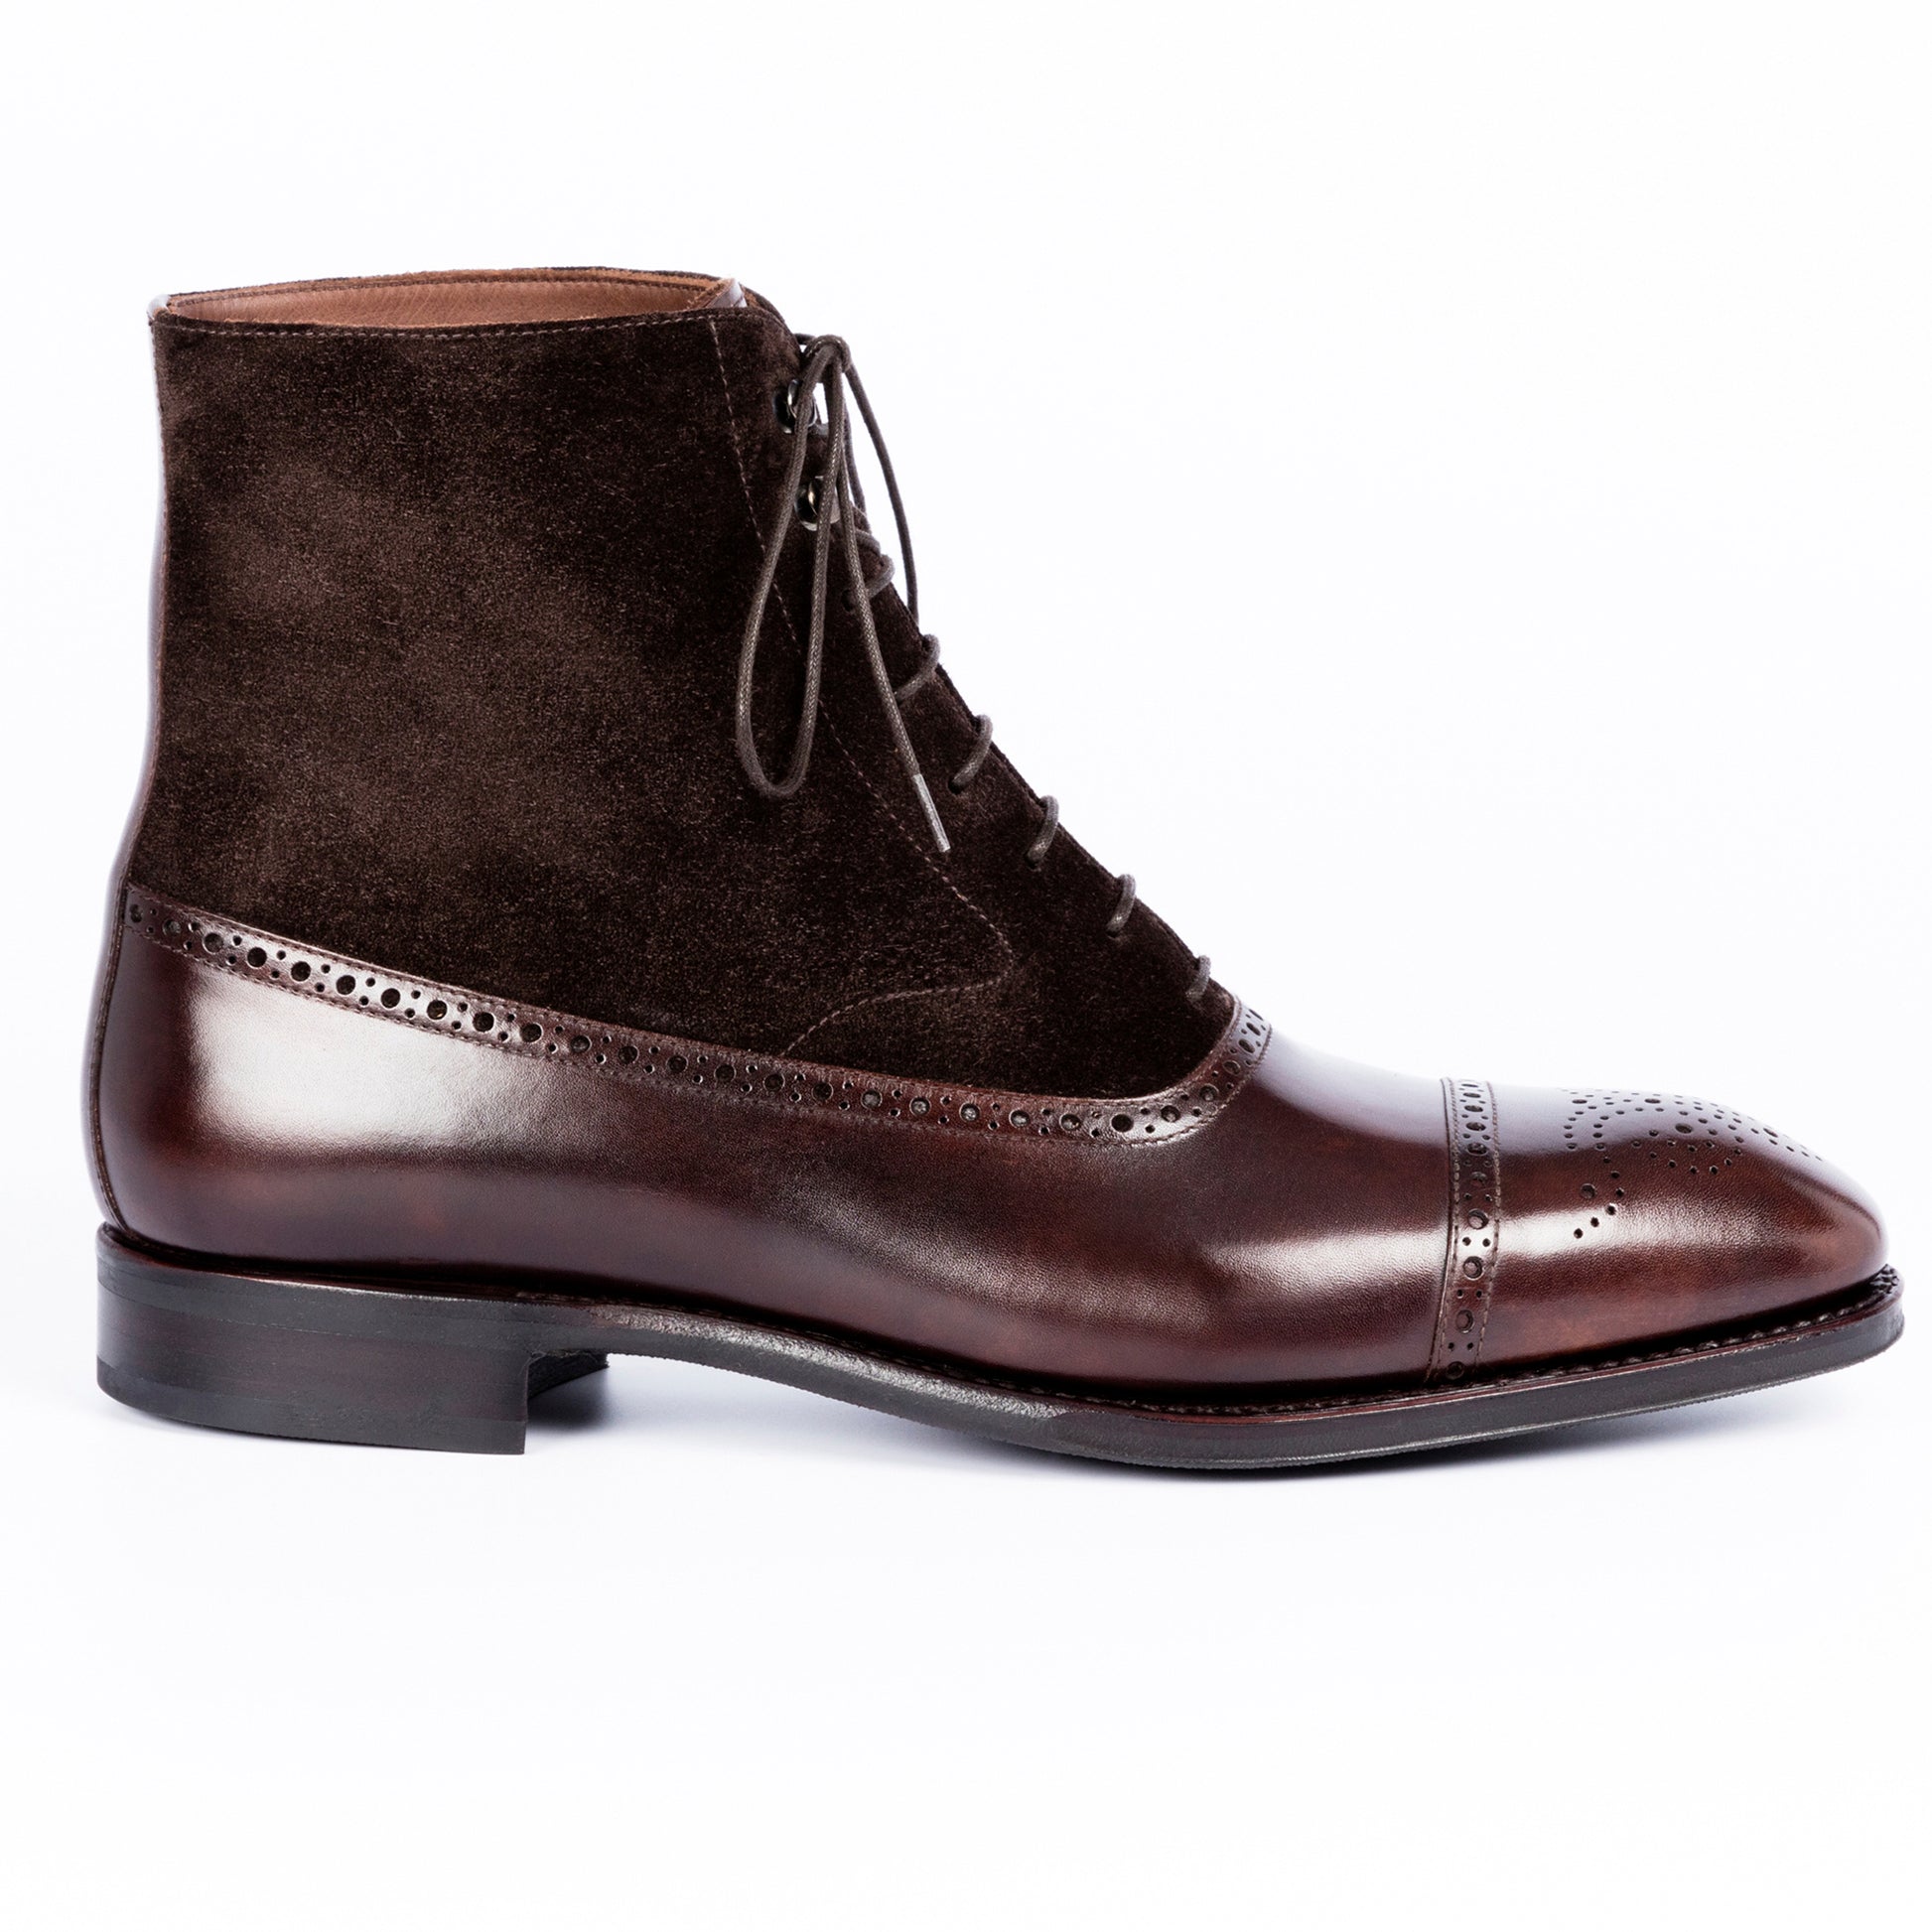 TLB Mallorca, Men's Boots made of leather, Men's Shoes